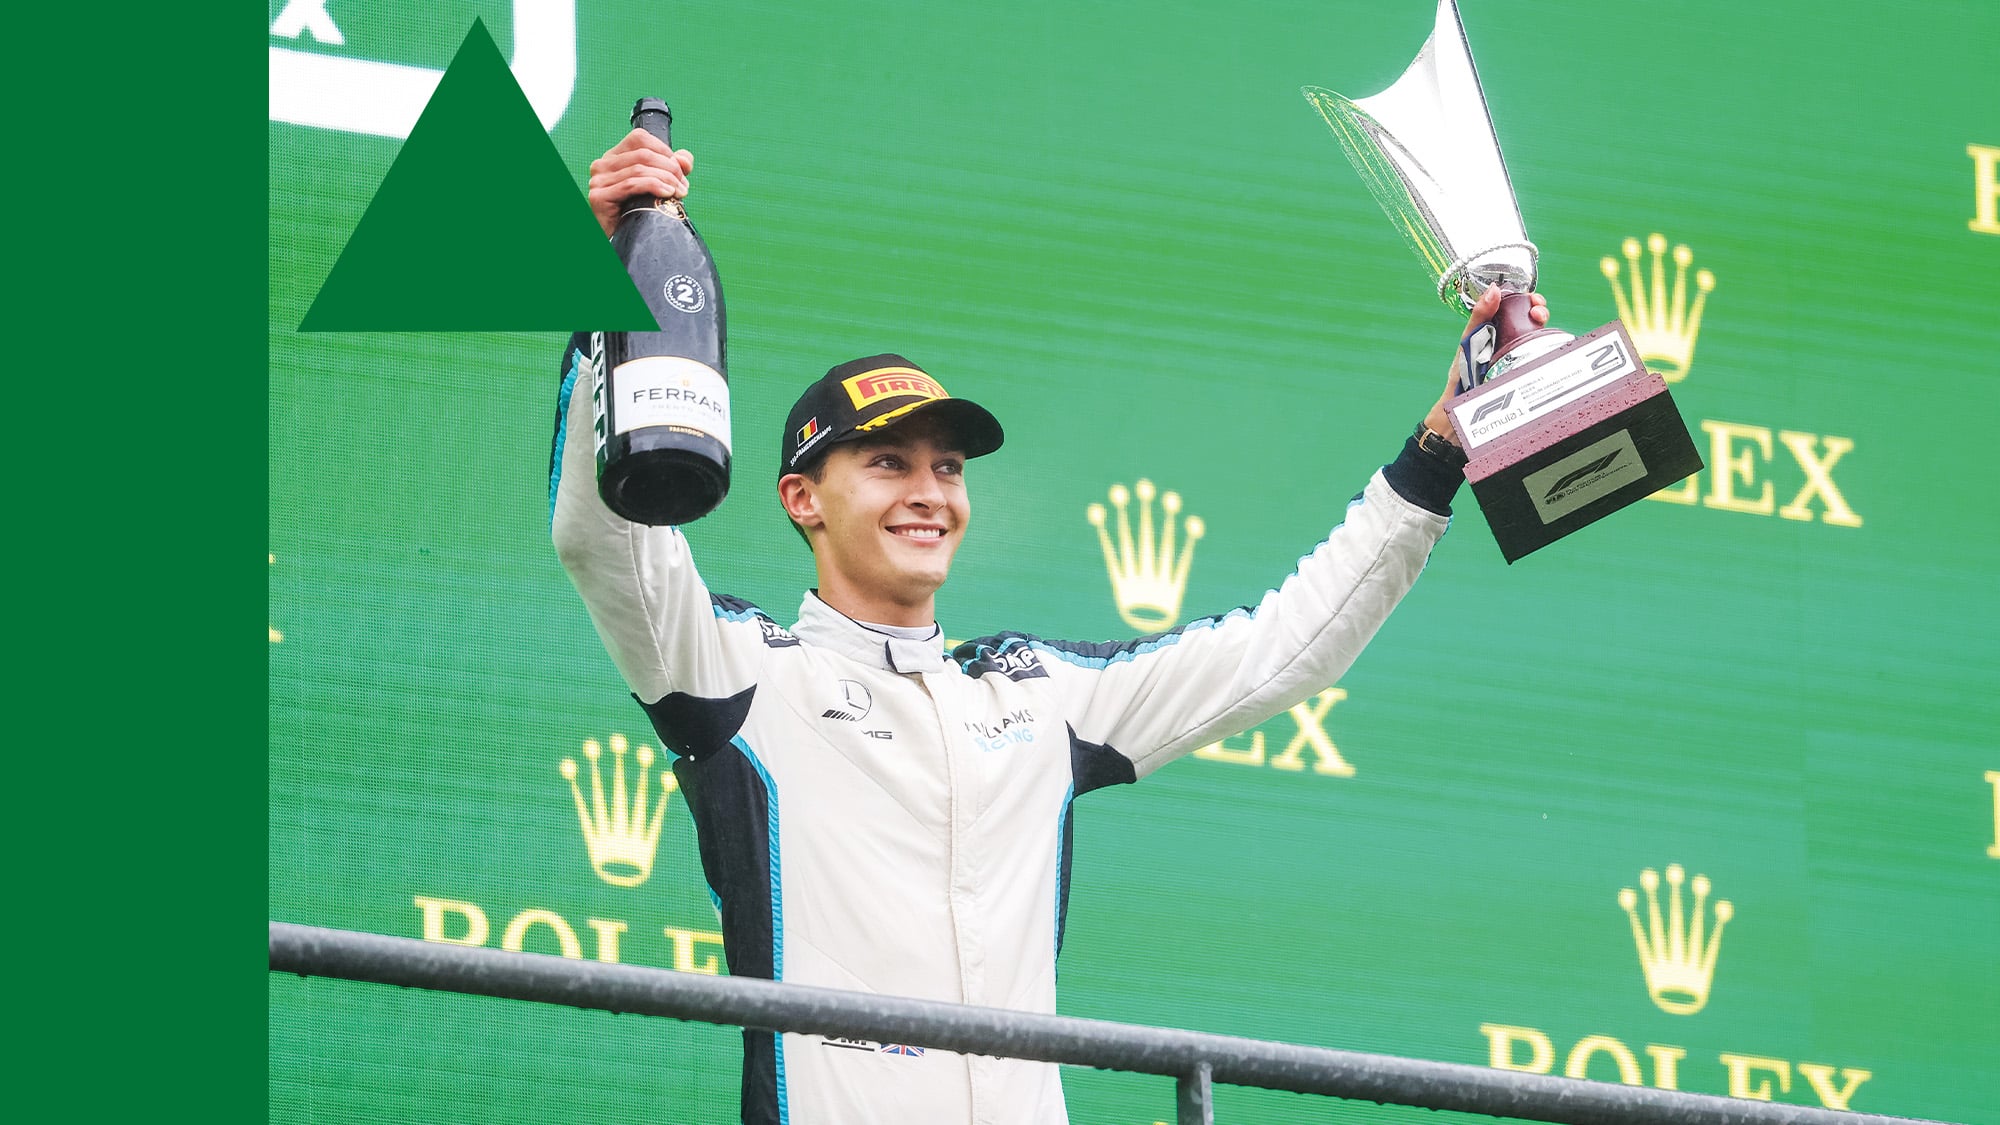 George Russell on the podium at Spa 2021